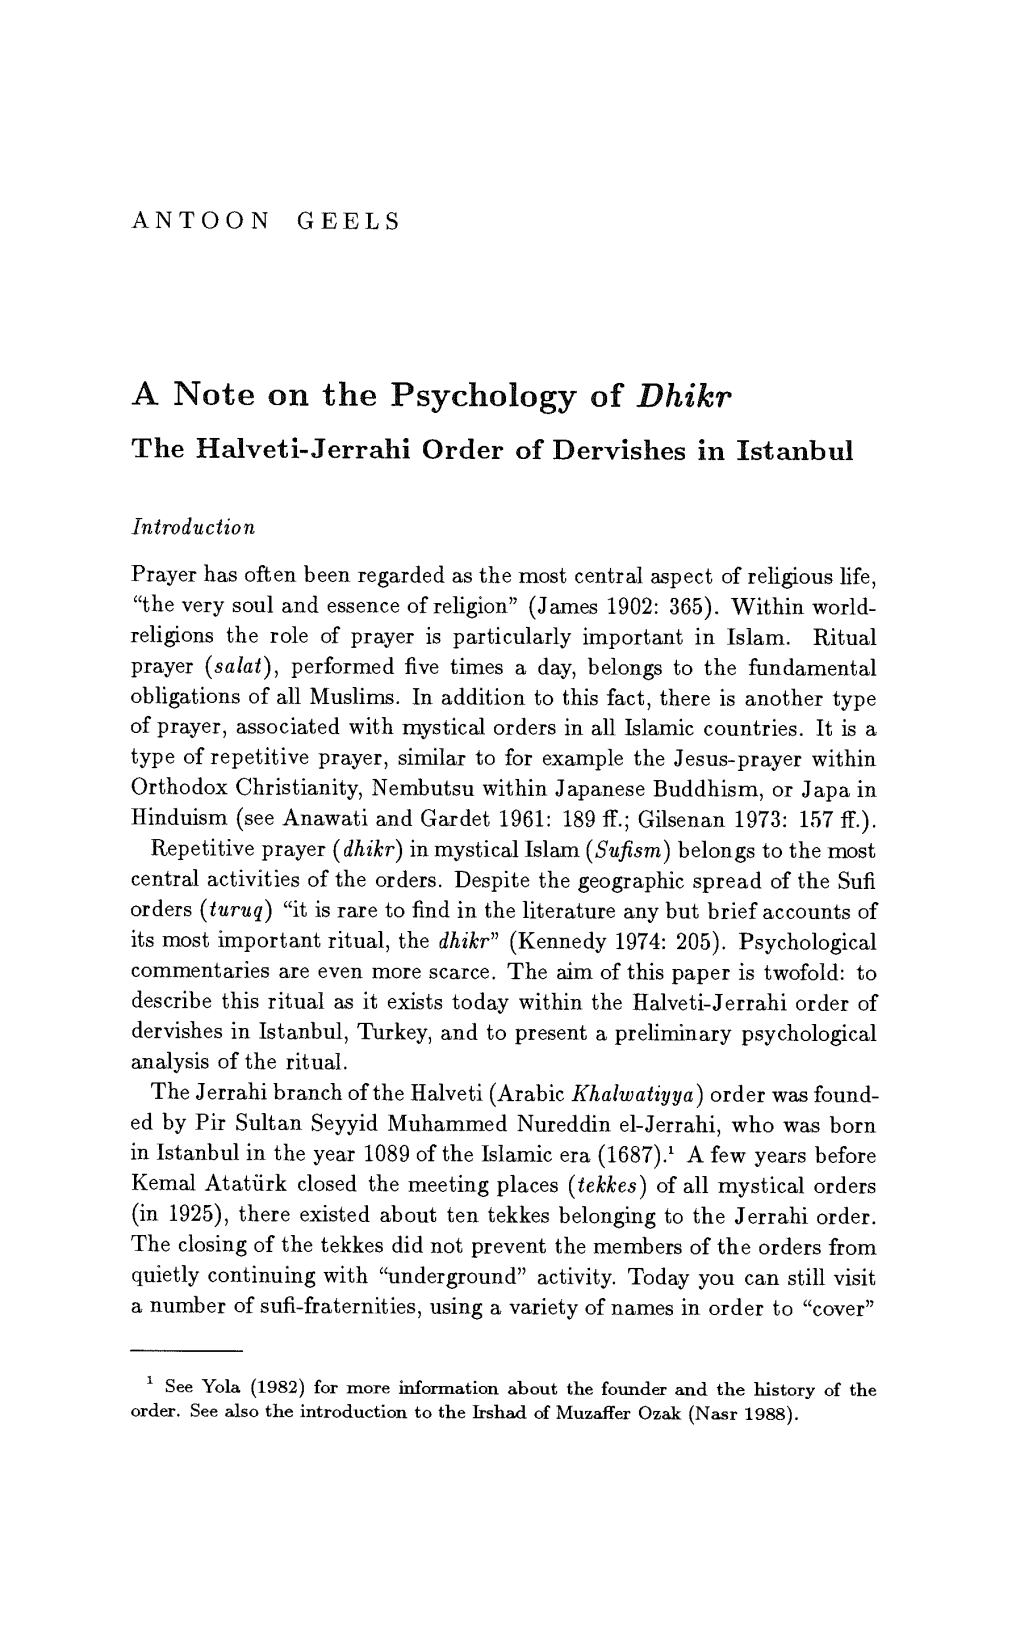 A Note on the Psychology of Dhikr the Halveti-Jerrahi Order of Dervishes in Istanbul